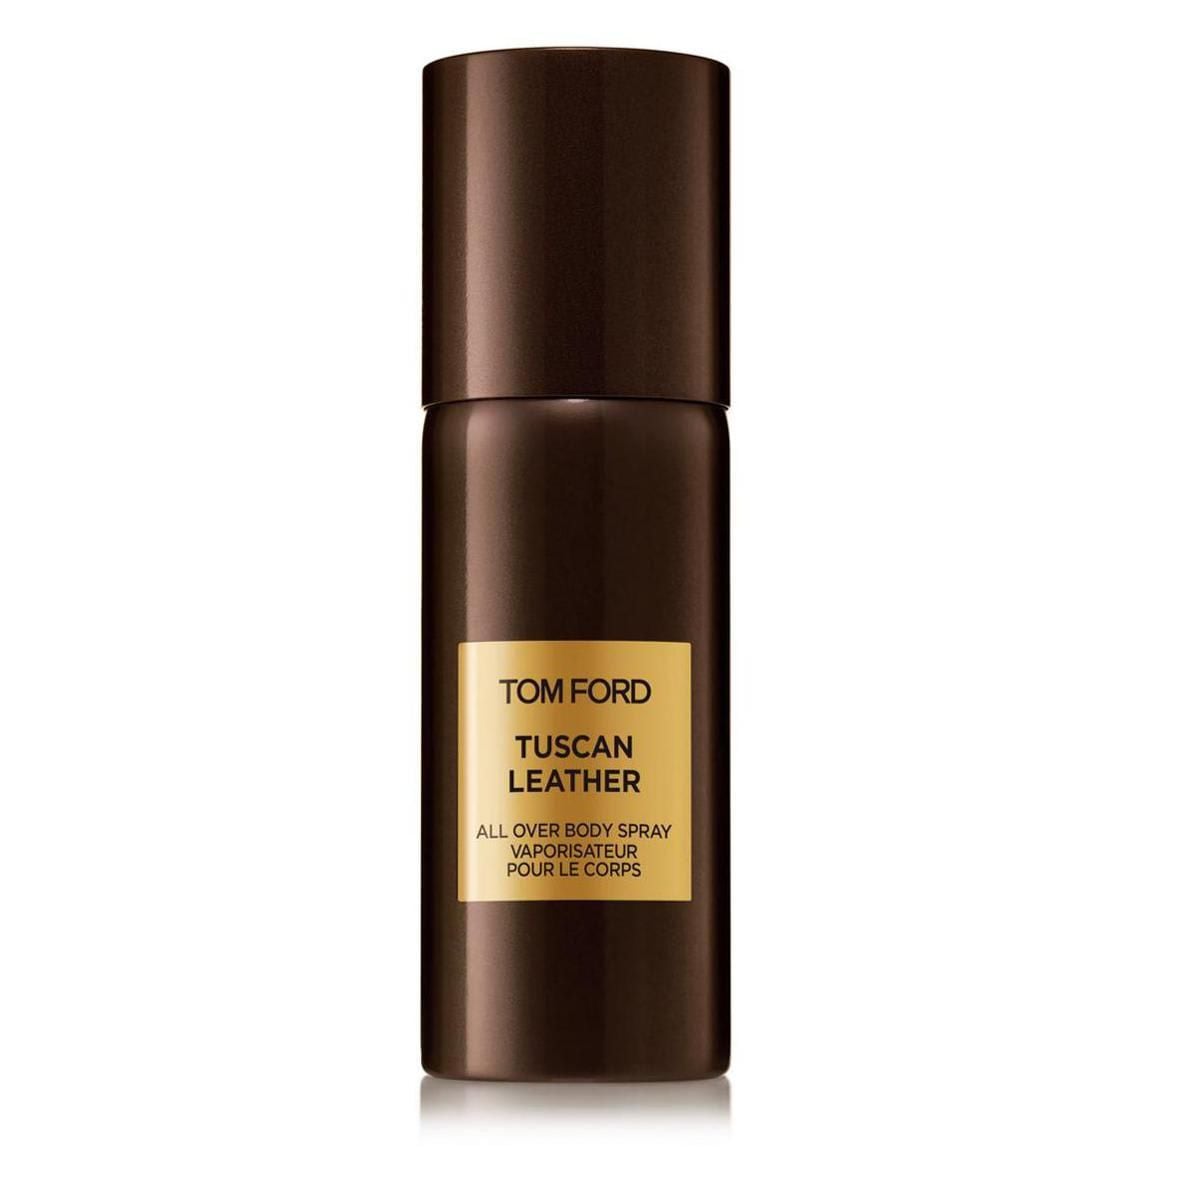 Tuscan leather all over body spray by Tom Ford